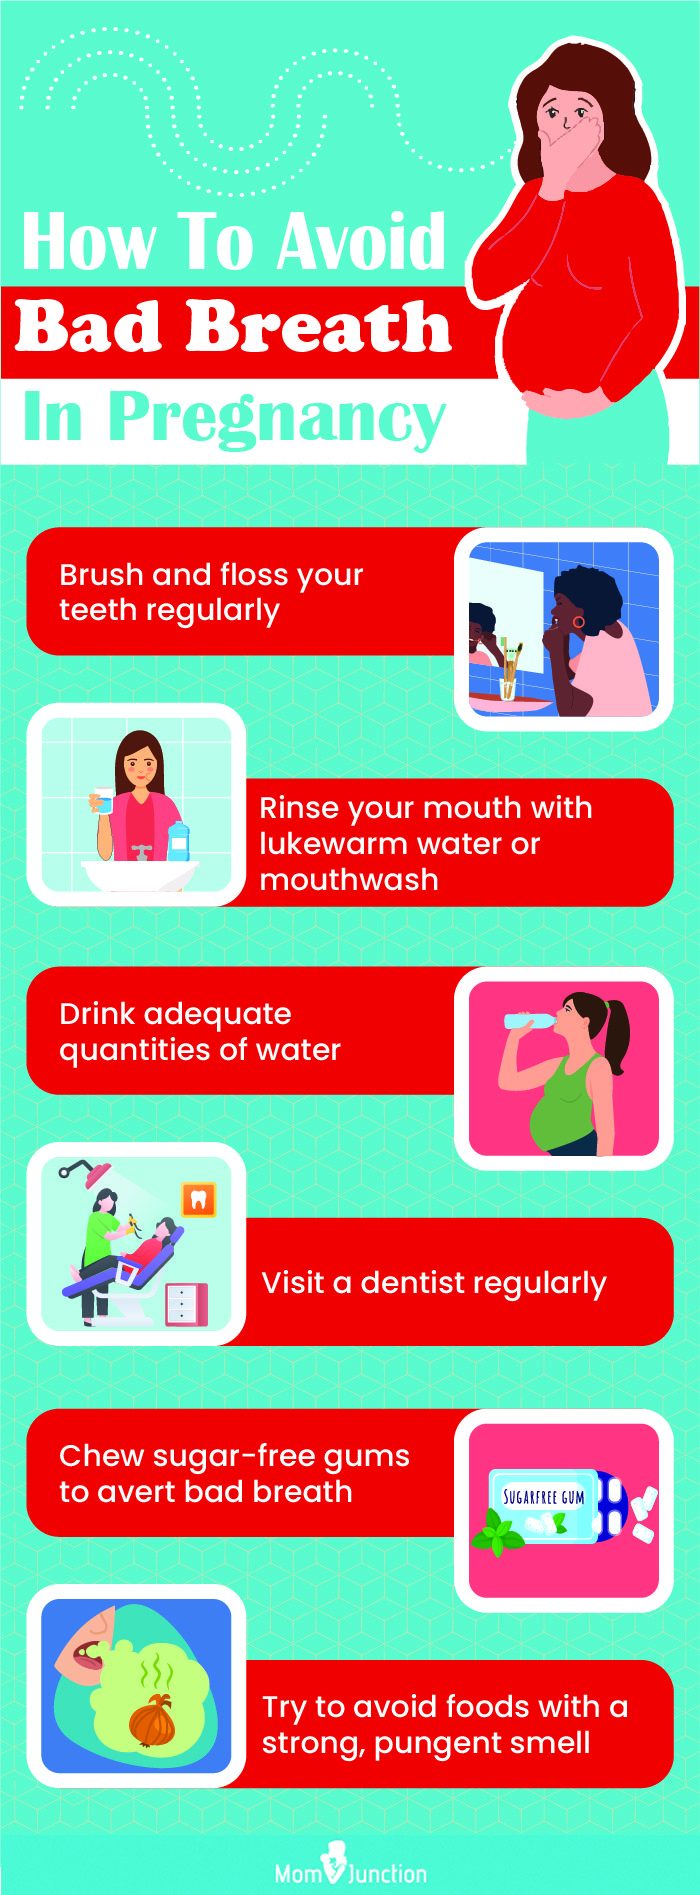 tips to ward off bad breath during pregnancy [infographic]